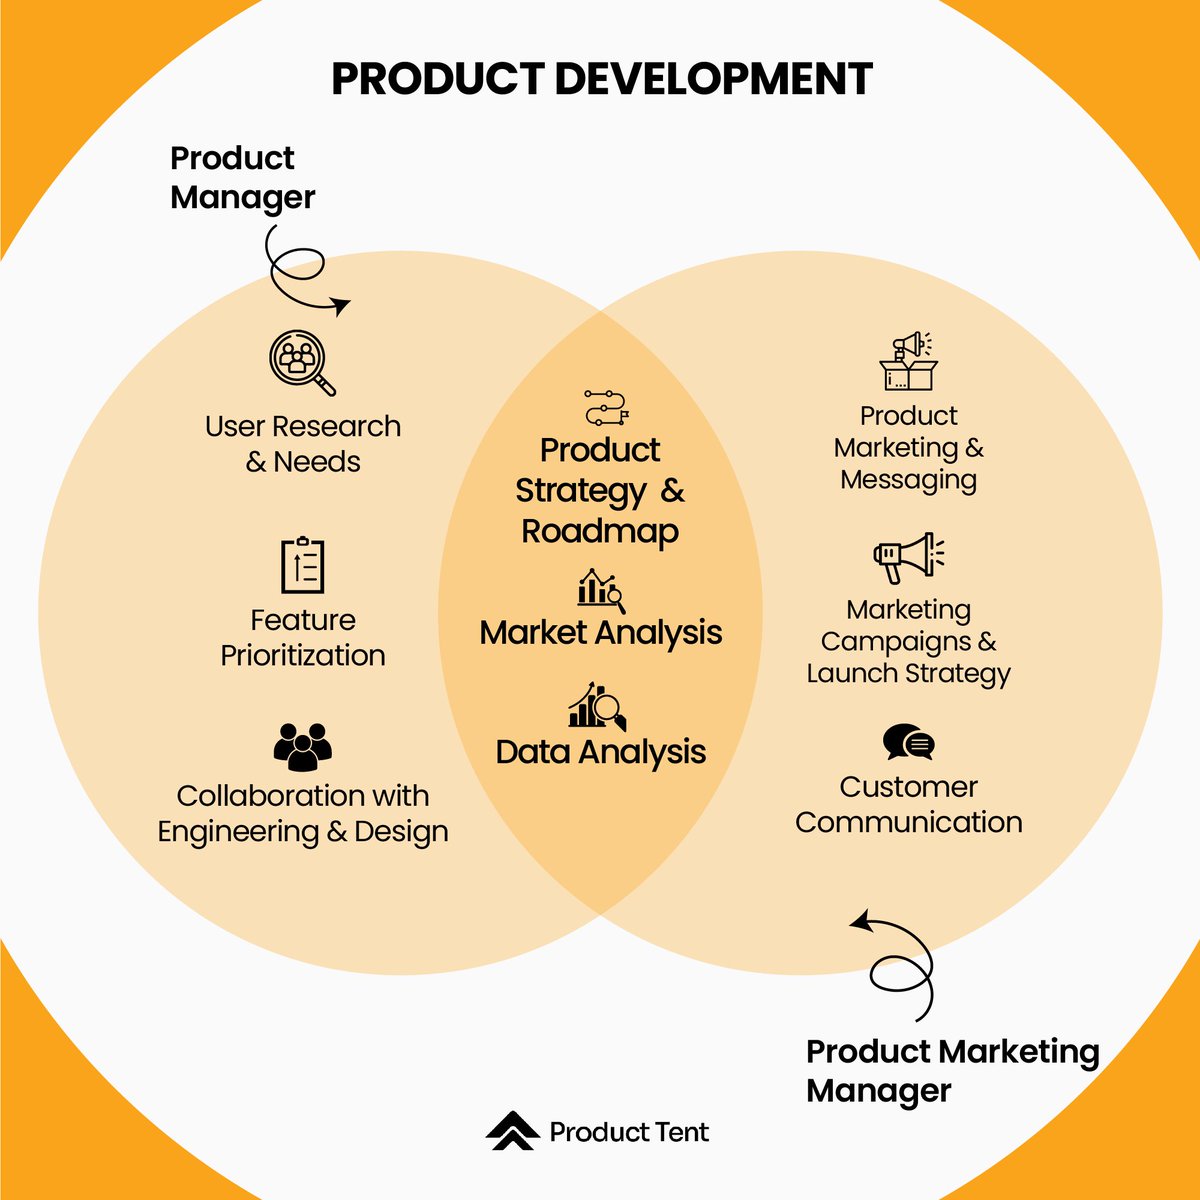 Here's a Venn Diagram illustrating the key areas of focus for Product Managers (PM) and Product Marketing Managers (PMM).

Follow us for more Insights on being a Product Manager.

#productmanager #productmarketing #pmillustration #pmknows